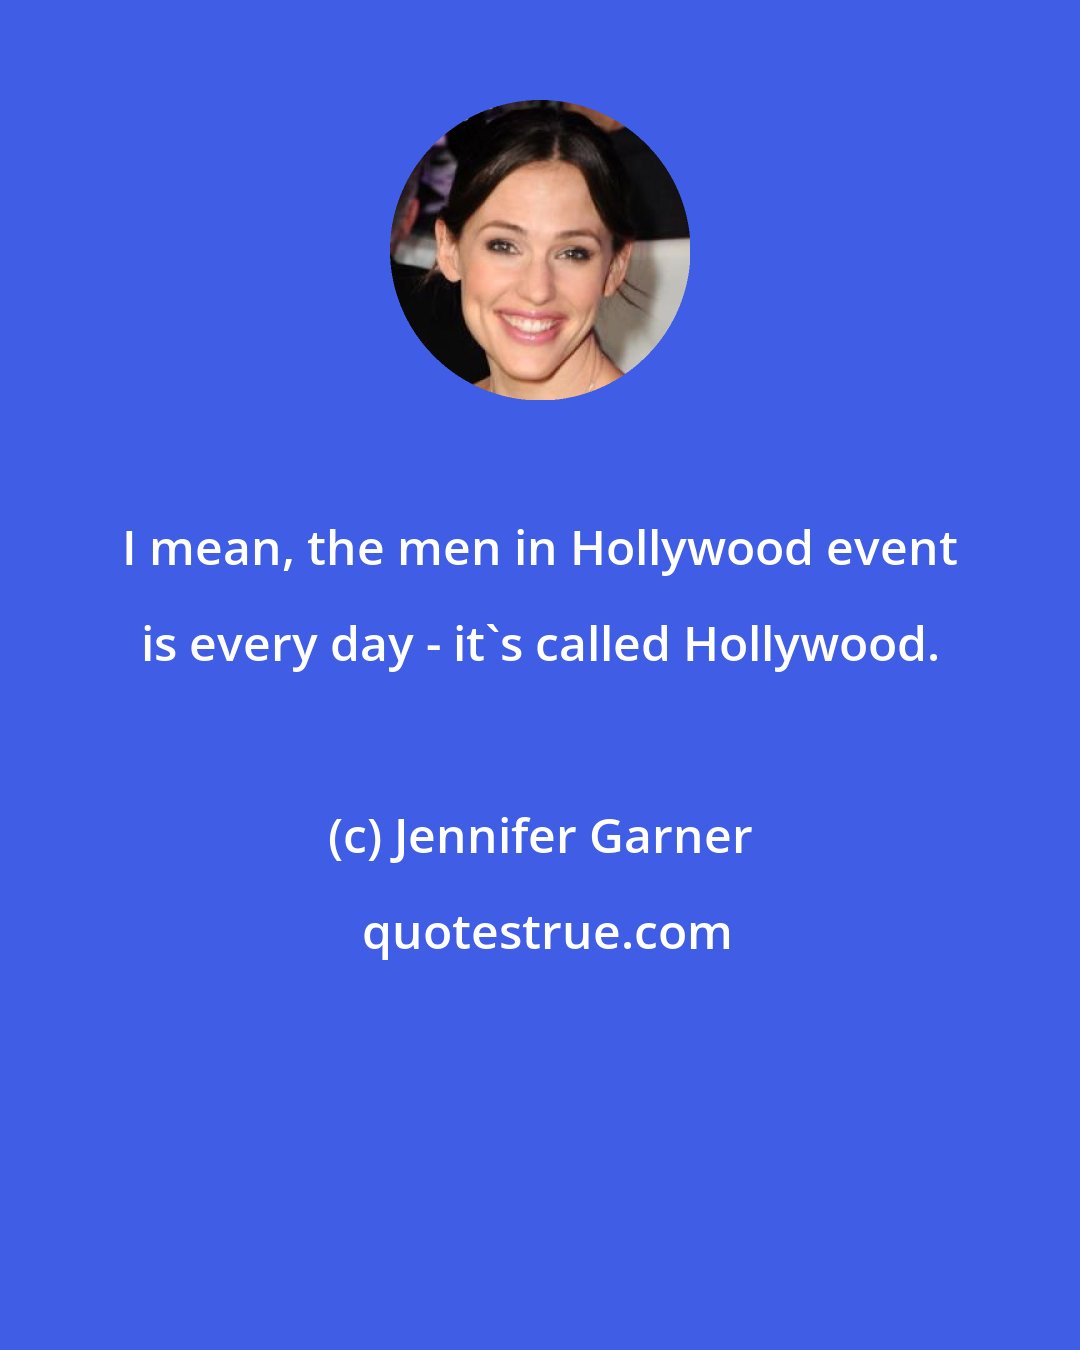 Jennifer Garner: I mean, the men in Hollywood event is every day - it's called Hollywood.